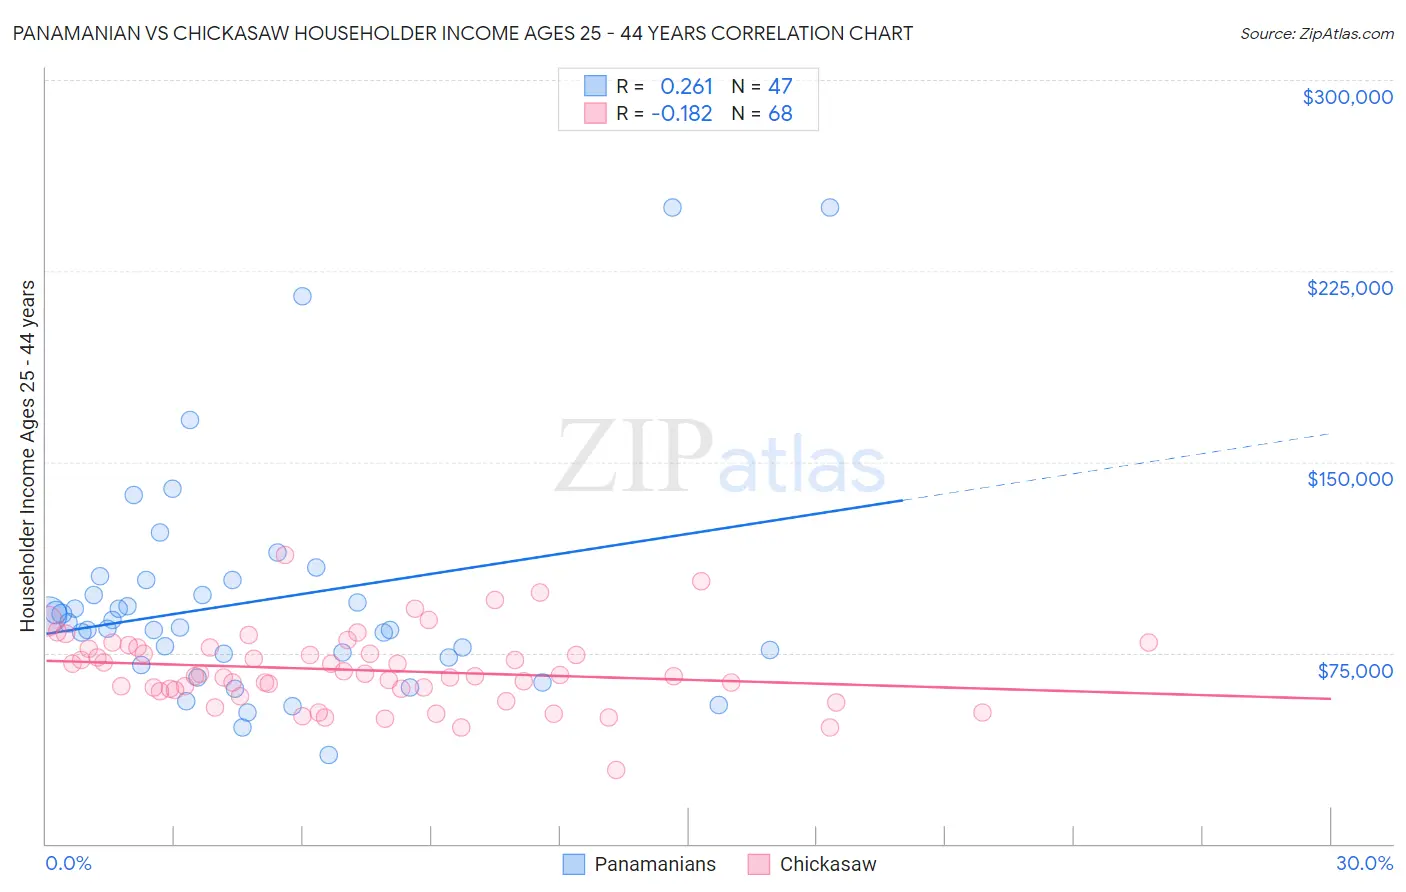 Panamanian vs Chickasaw Householder Income Ages 25 - 44 years